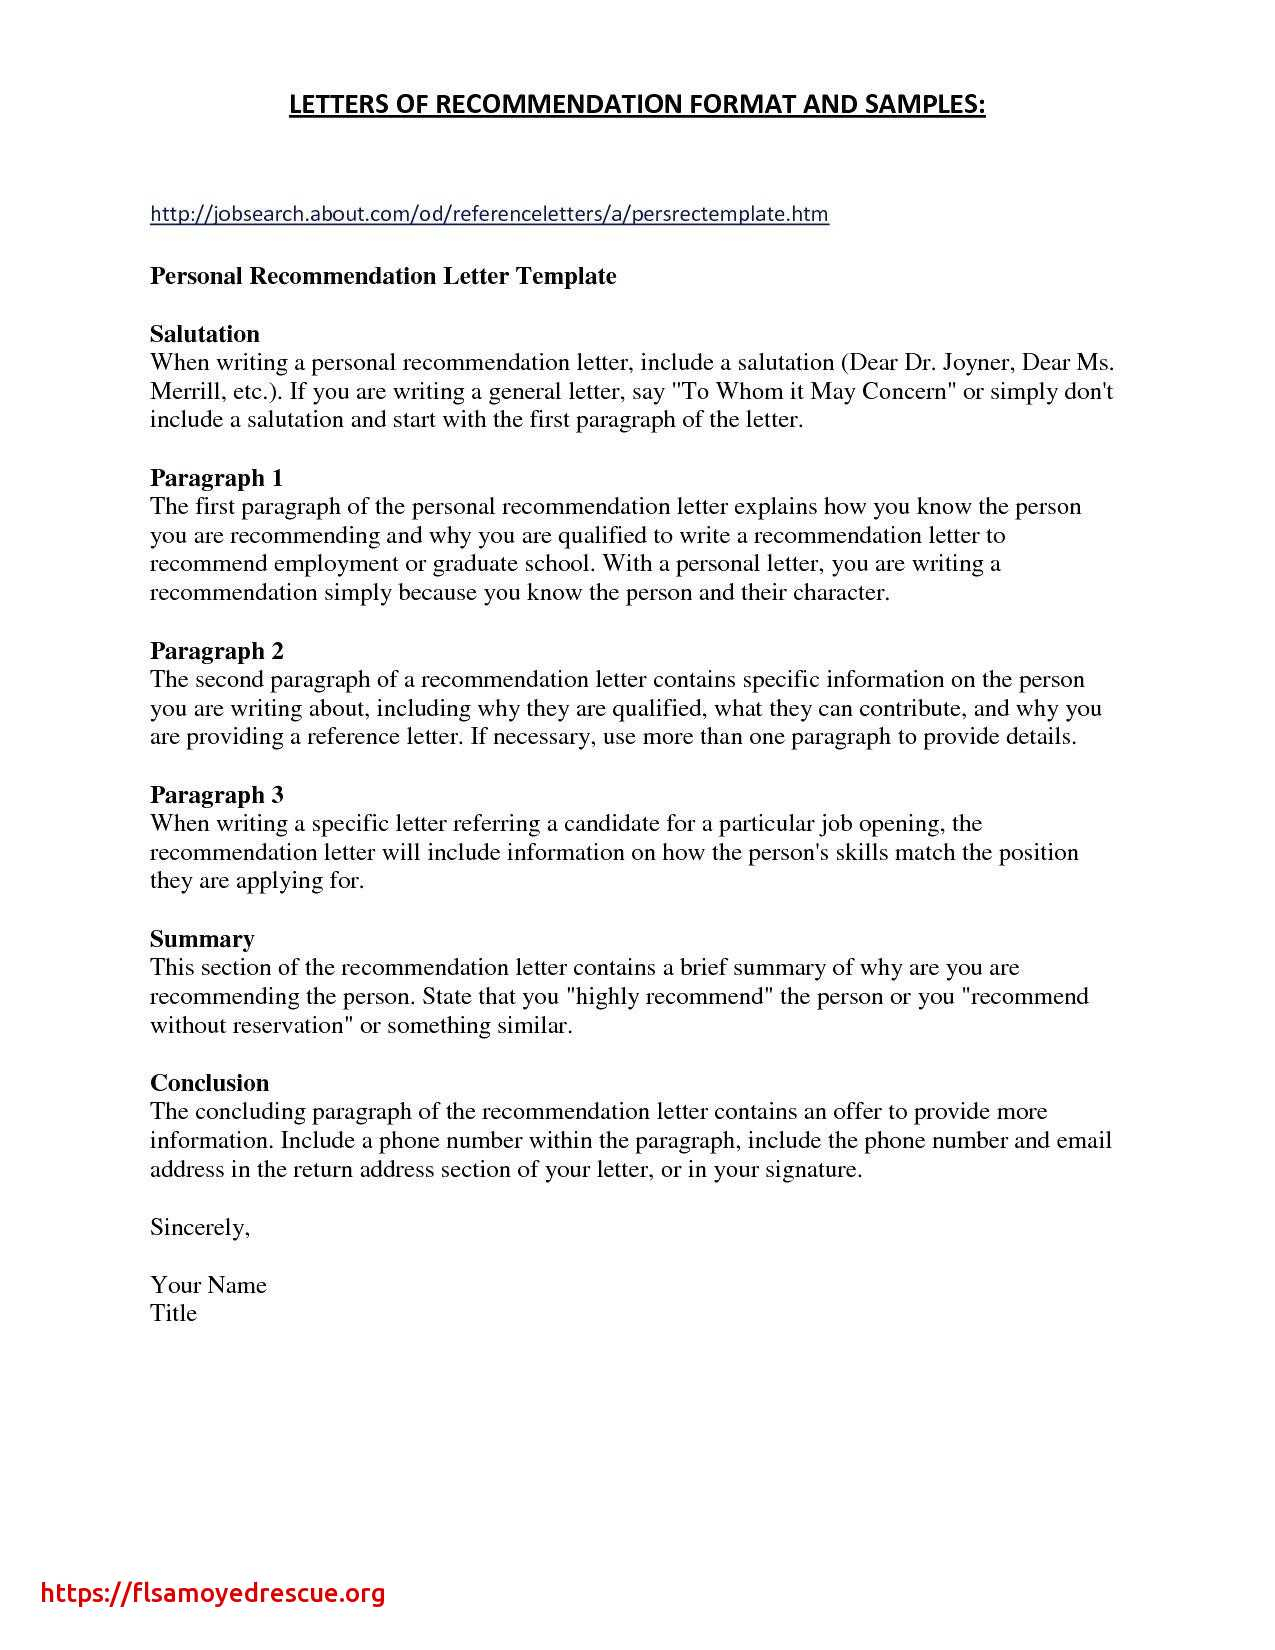 letter of recommendation template example-Character Reference Letter Template Doc New Writing Letter Reference New Character Reference Letter Examples 8-e